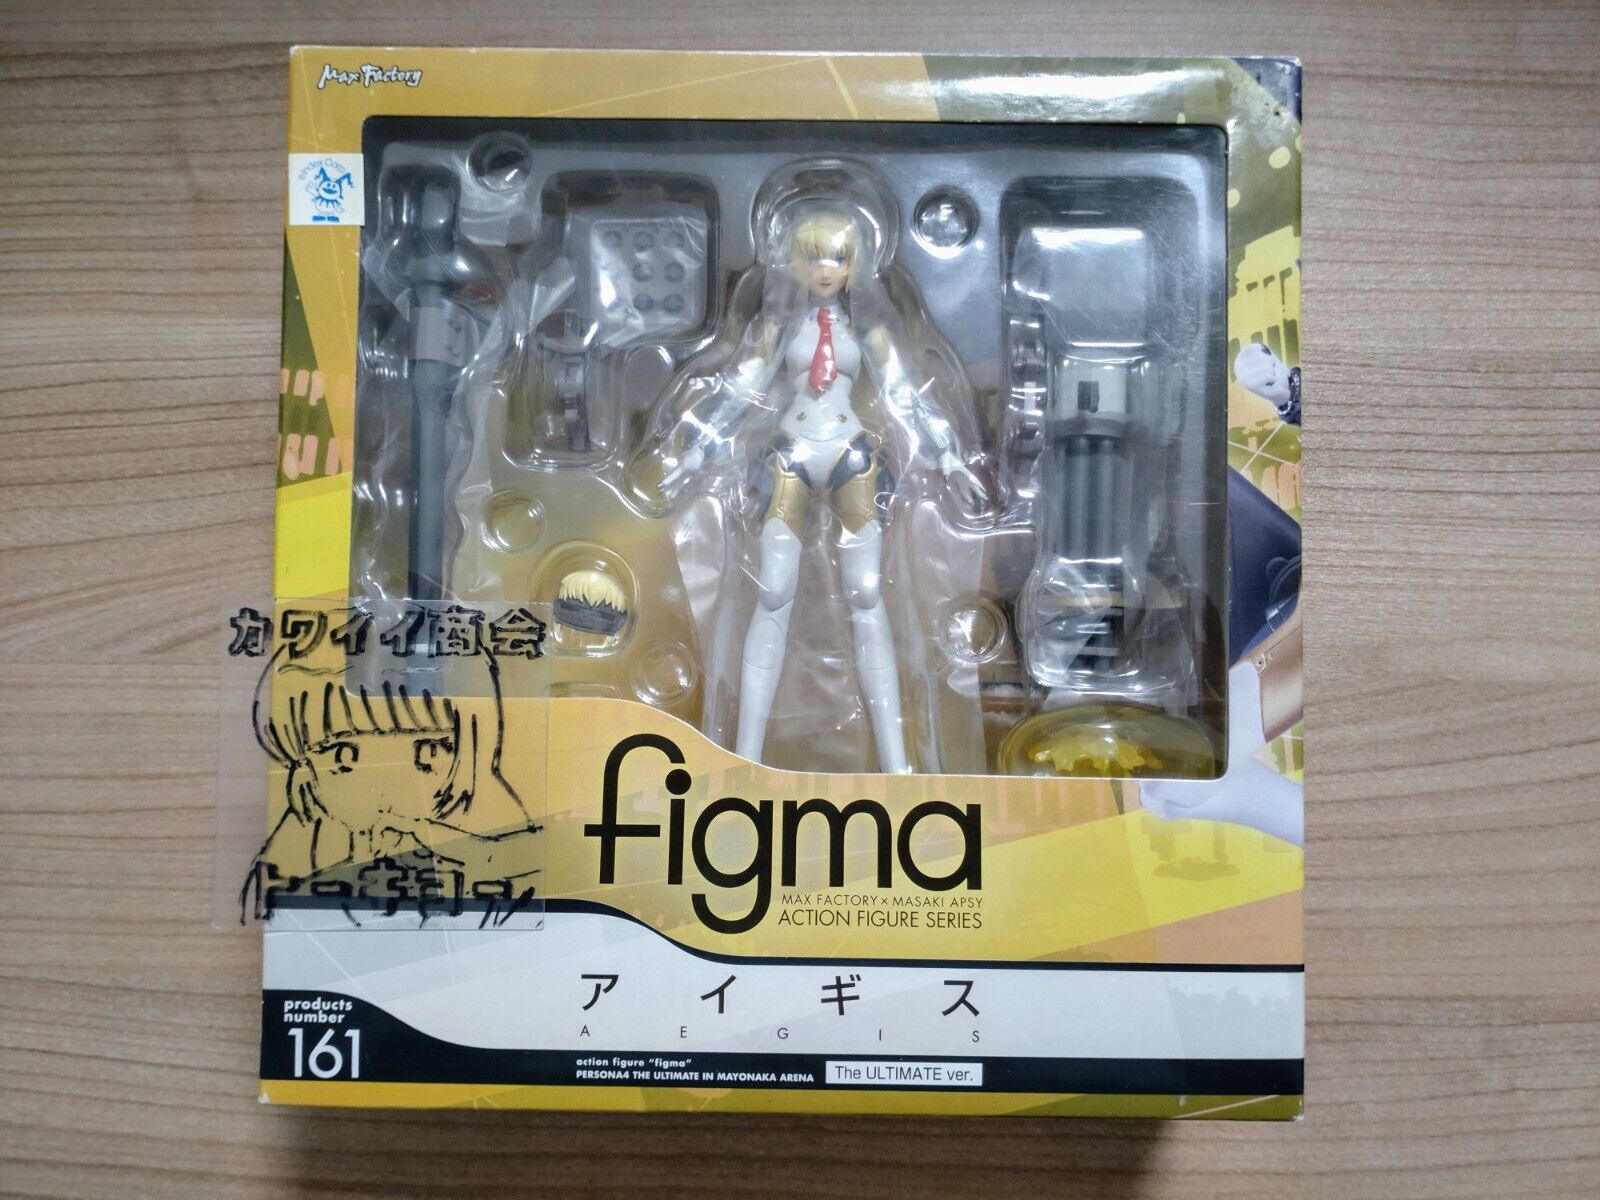 Persona 4 Aigis Figma Action Figure The Ultimate Arena Max Factory FedEx